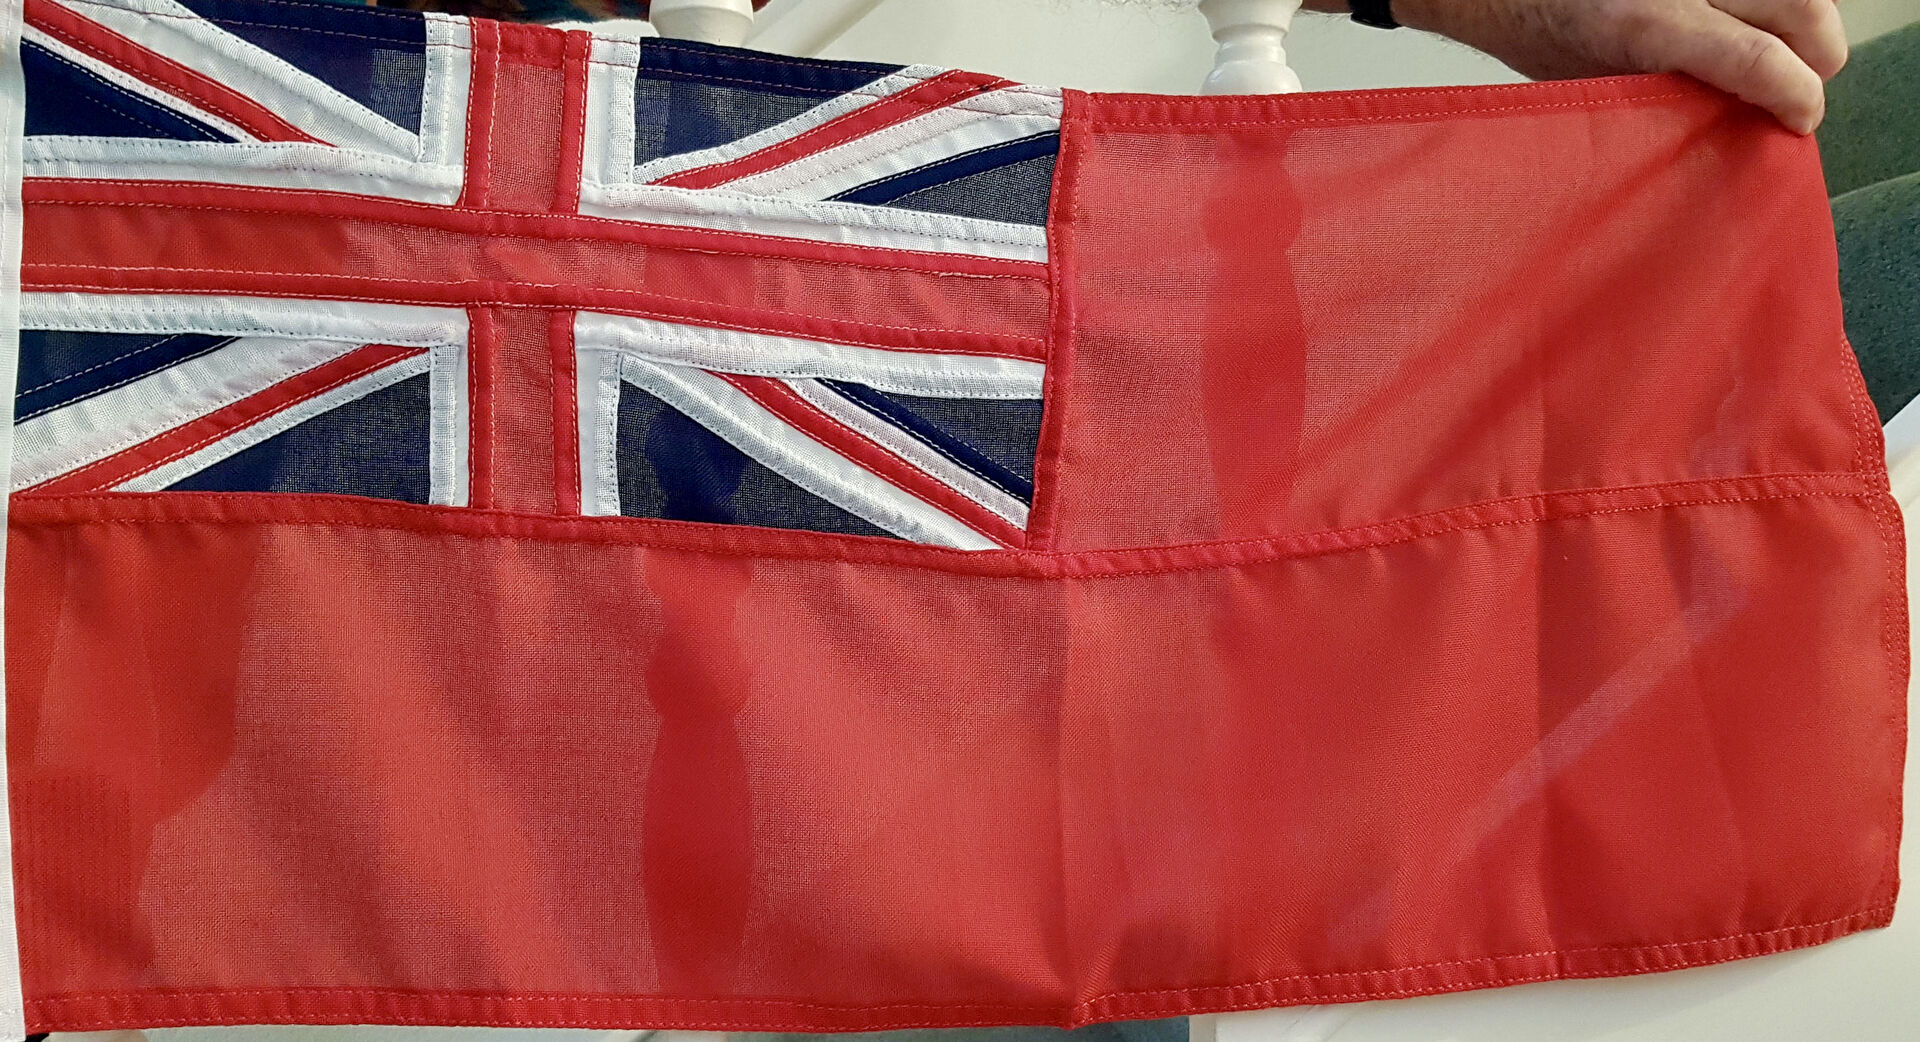 Flying the red ensign